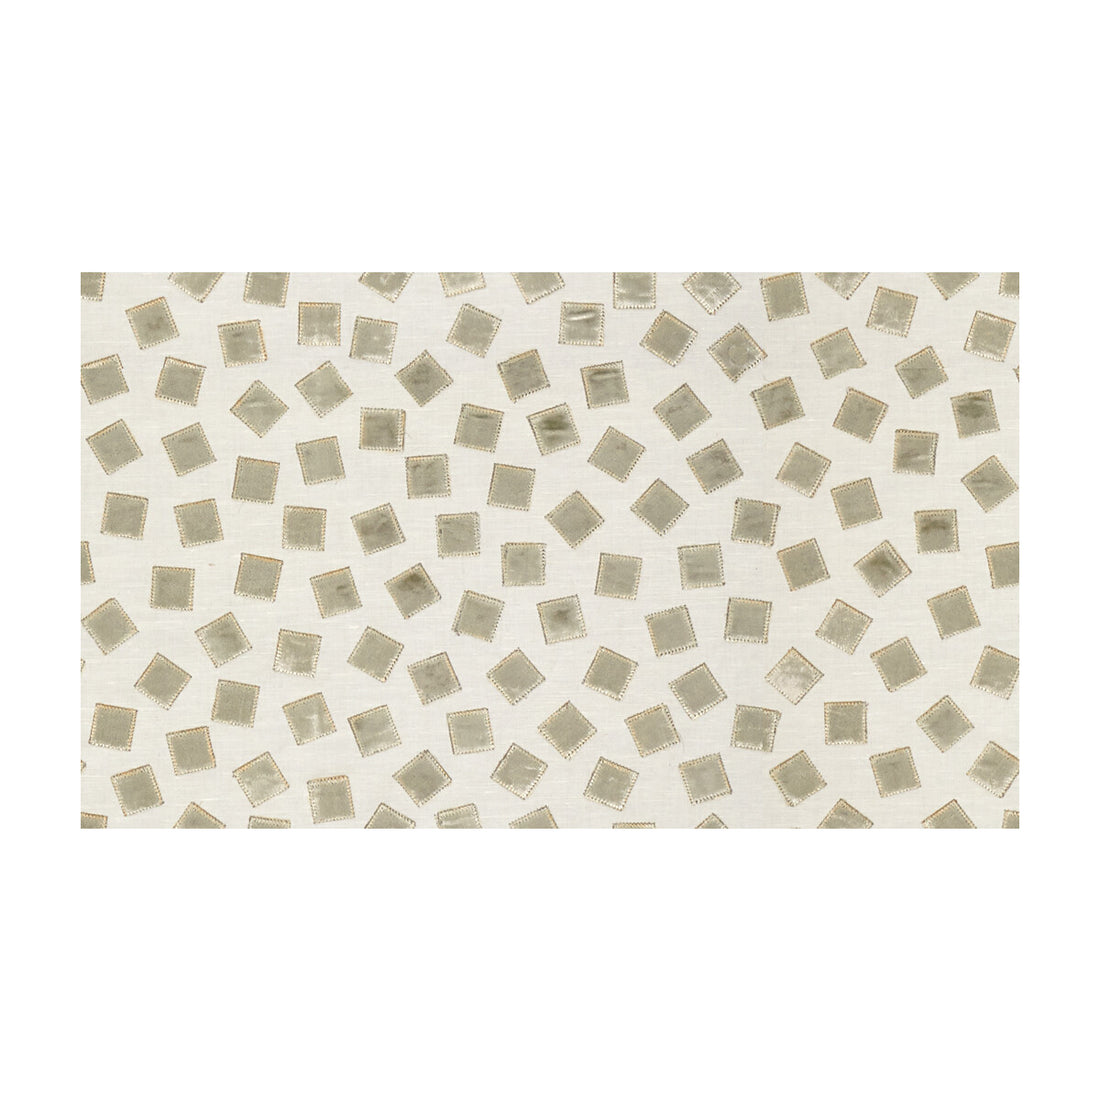 Building Blocks fabric in truffle color - pattern 33548.1.0 - by Kravet Couture in the Modern Luxe collection